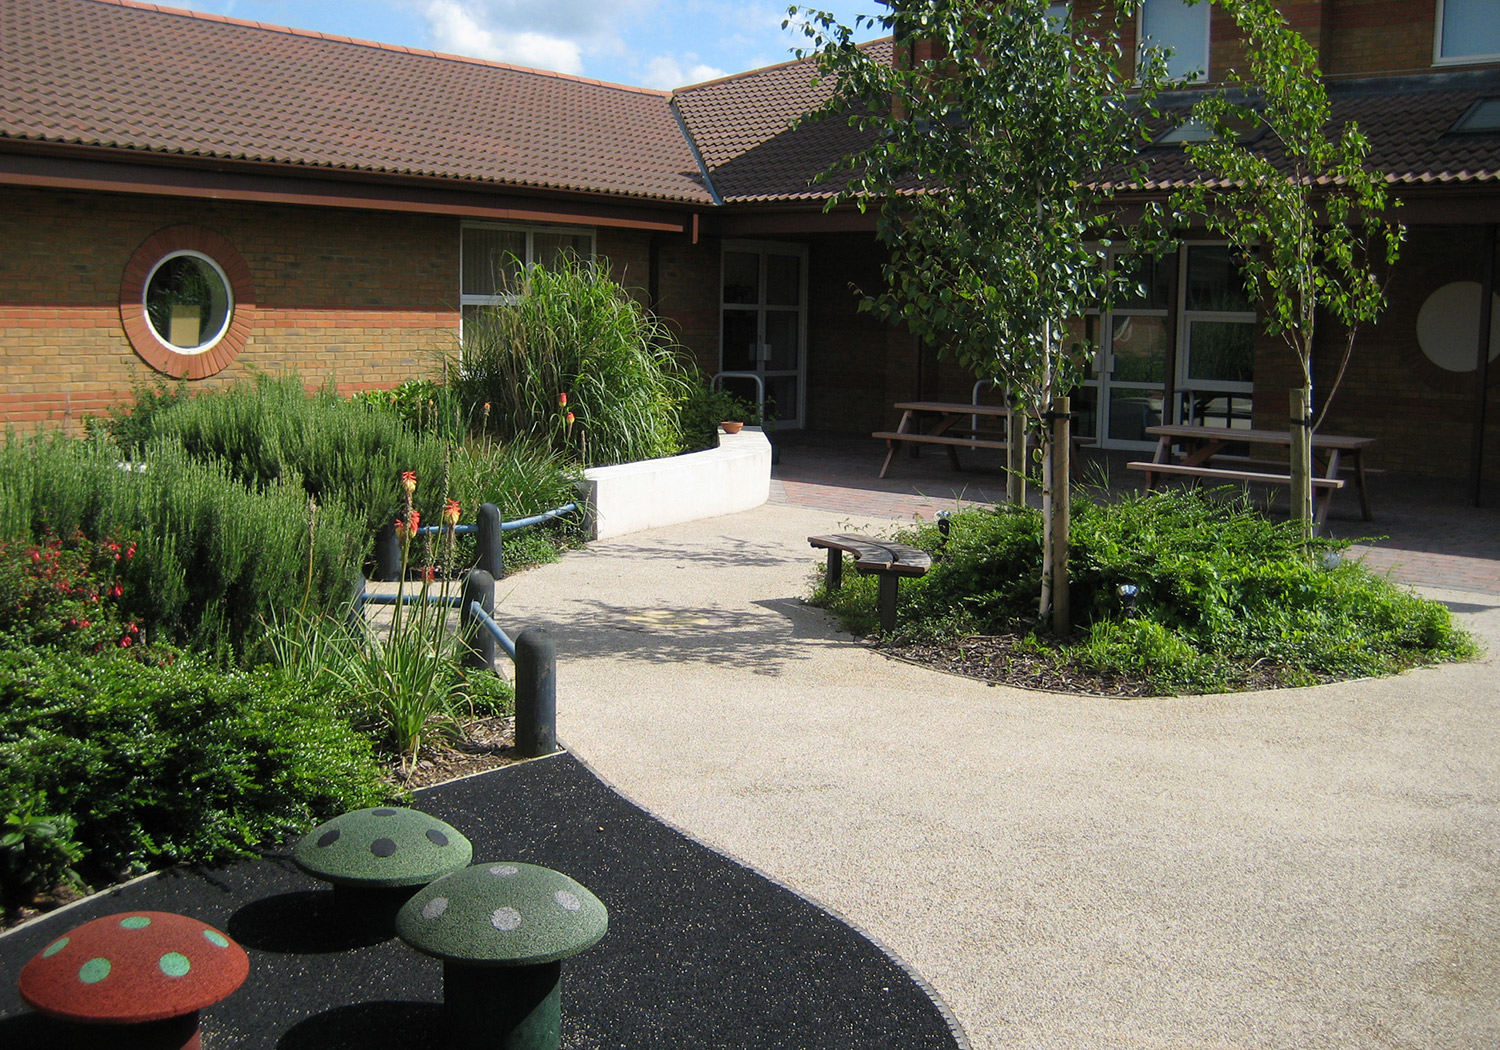 Projects-Education-ElmstowPrimary-Courtyard-1500x1050